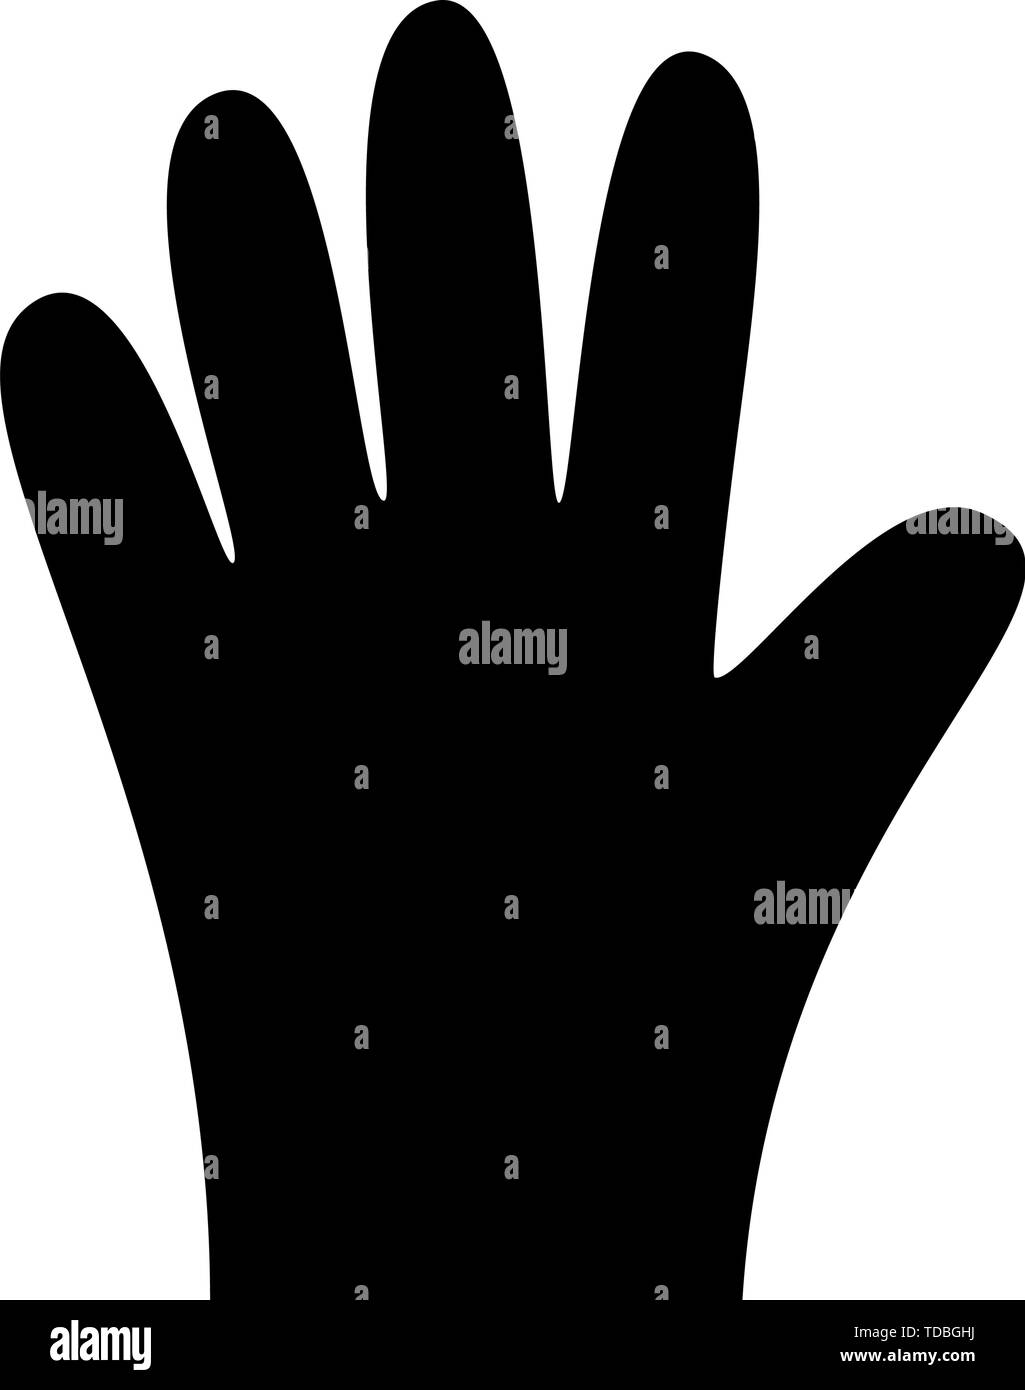 Black and white disposable glove silhouette Stock Vector